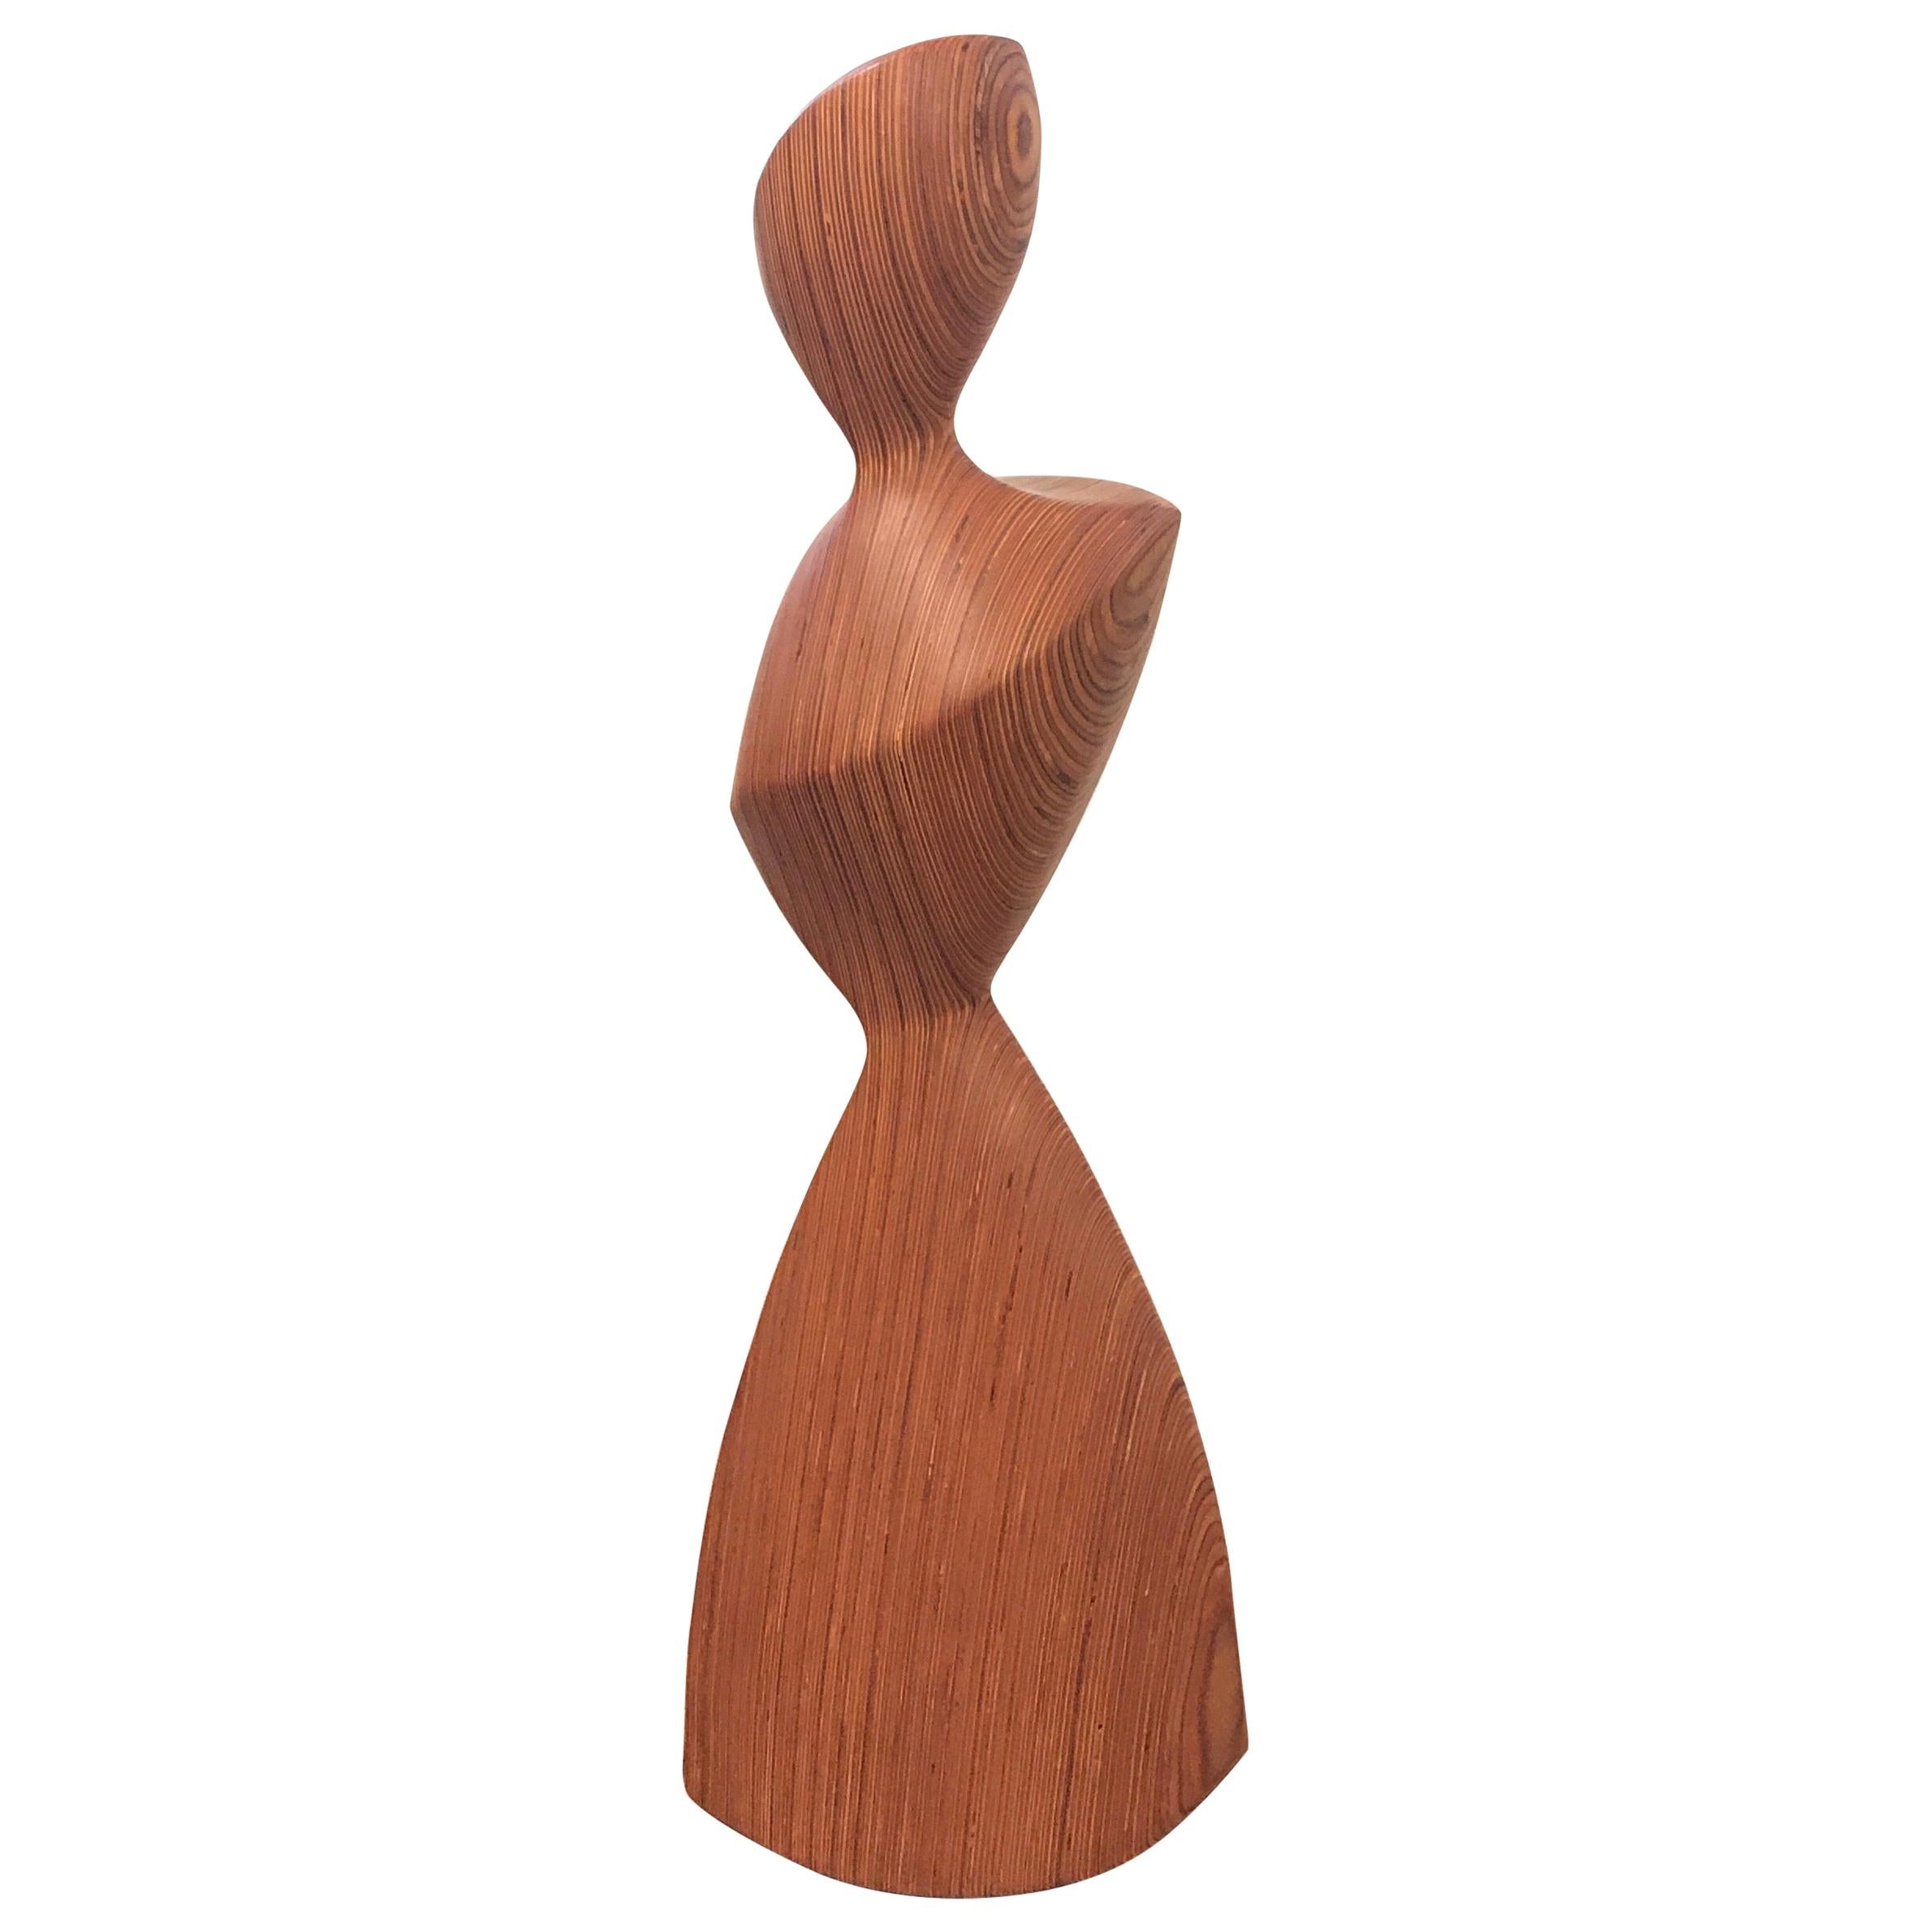 Wood Laminated Abstract Sculpture of a Woman, 1960s